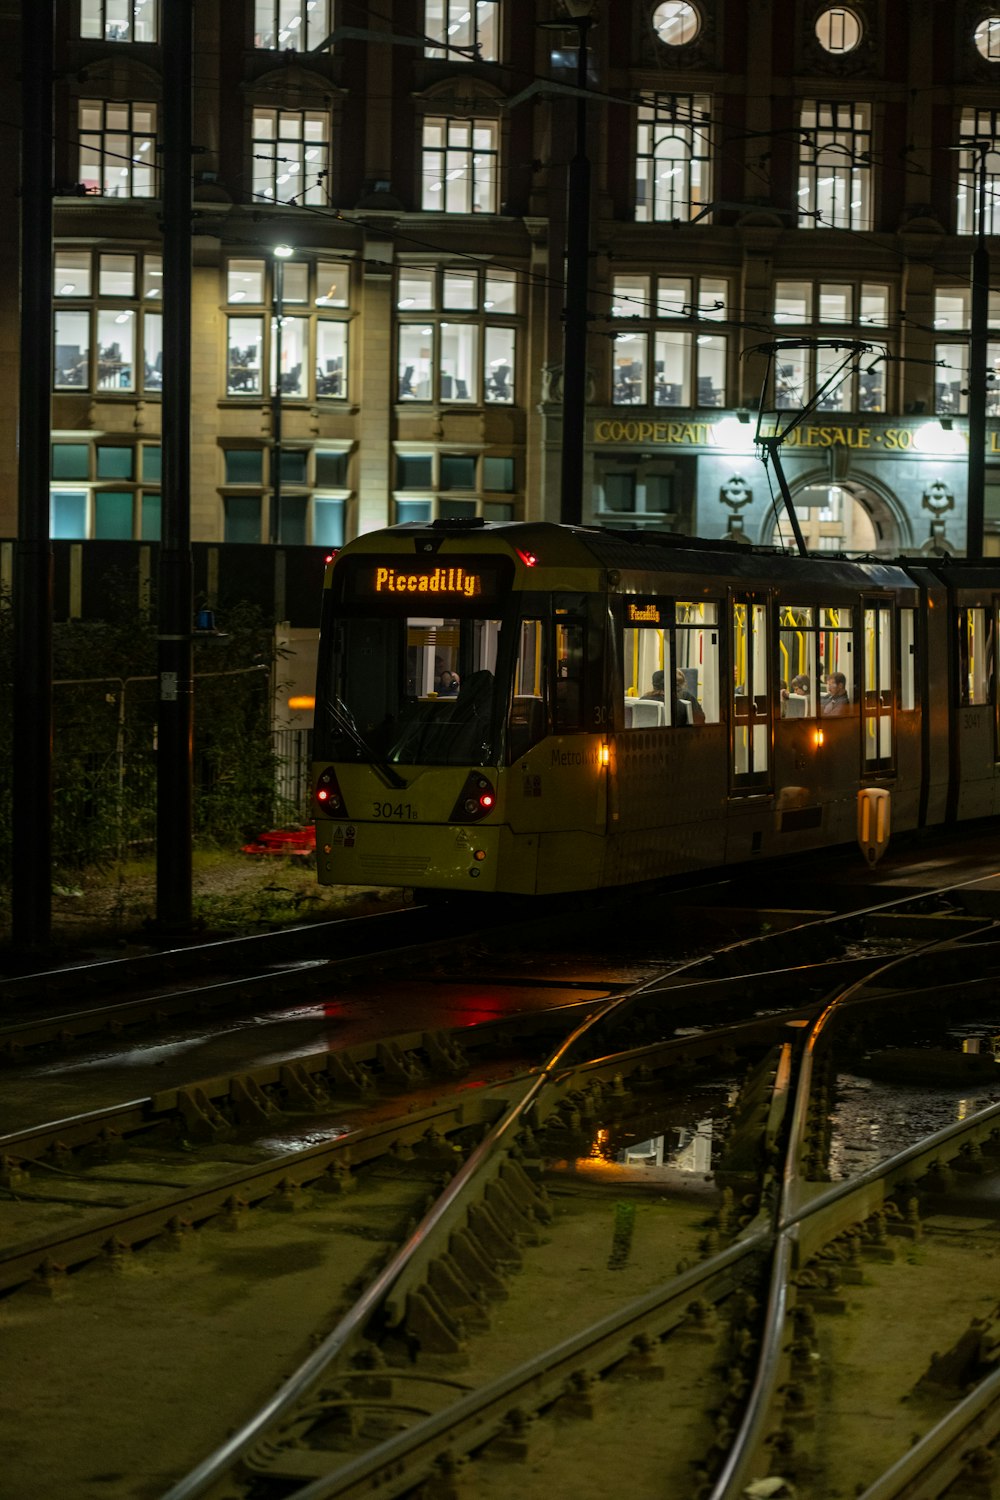 a trolley on tracks in front of a building at night